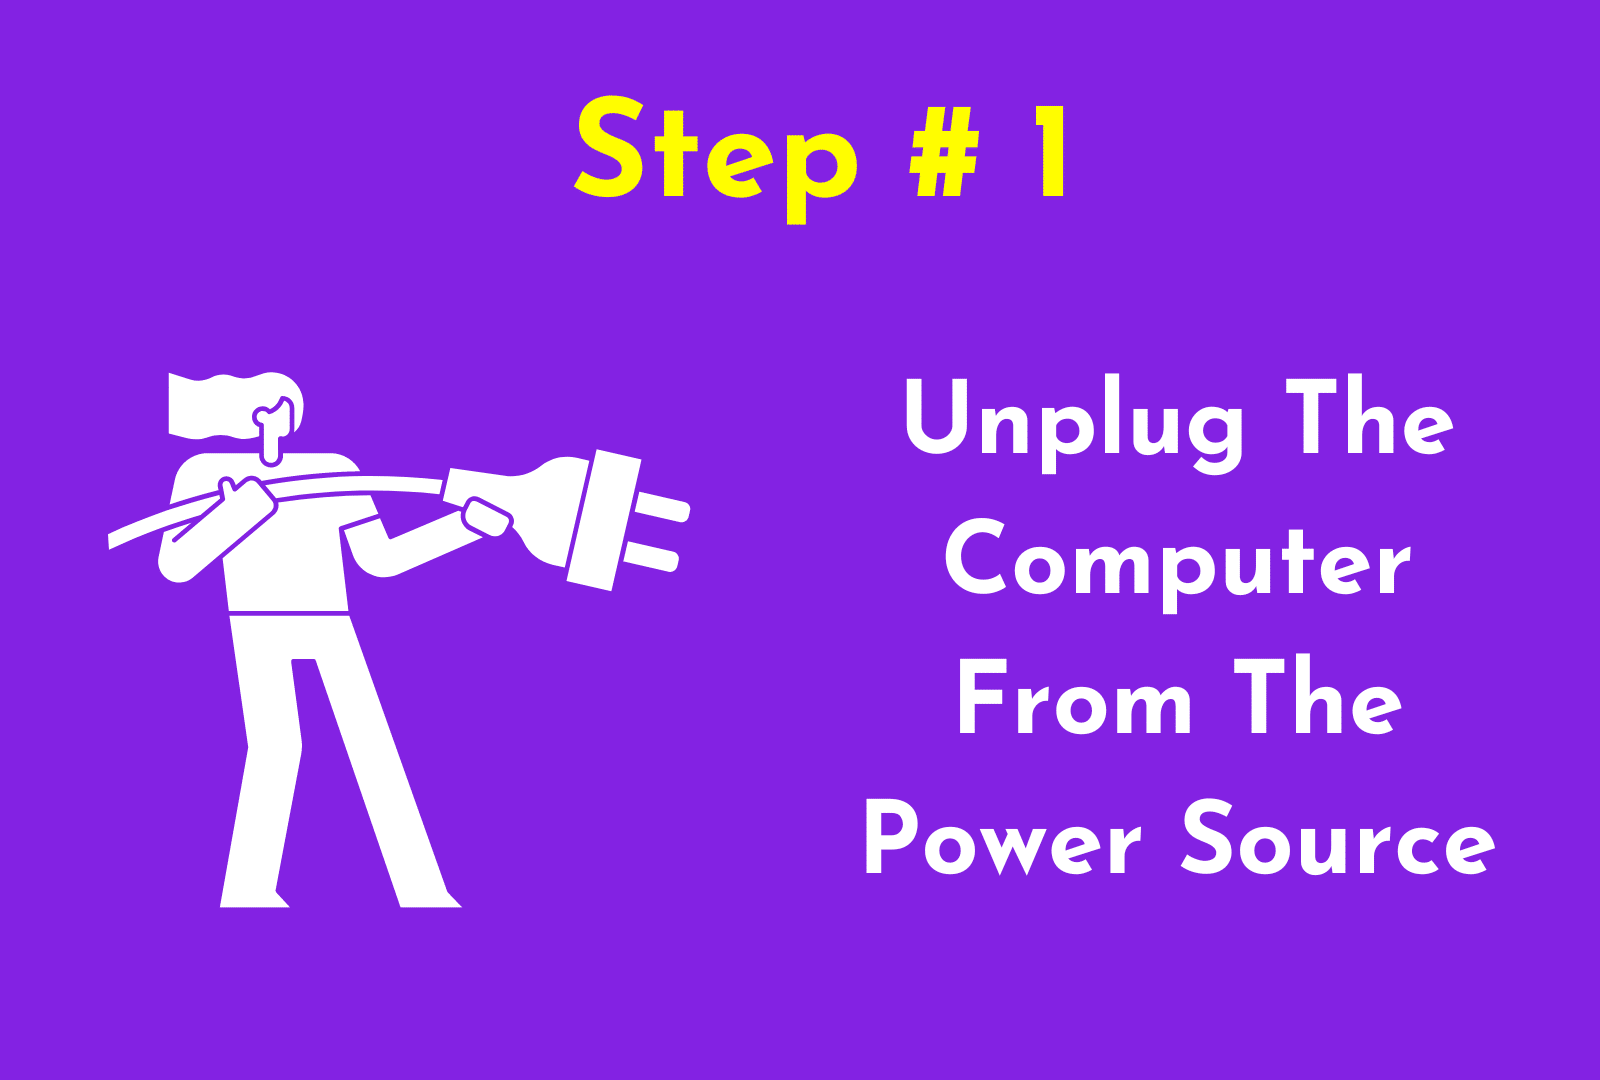 C:\Users\Mohsin\Downloads\Unplug The Computer From The Power Source.png